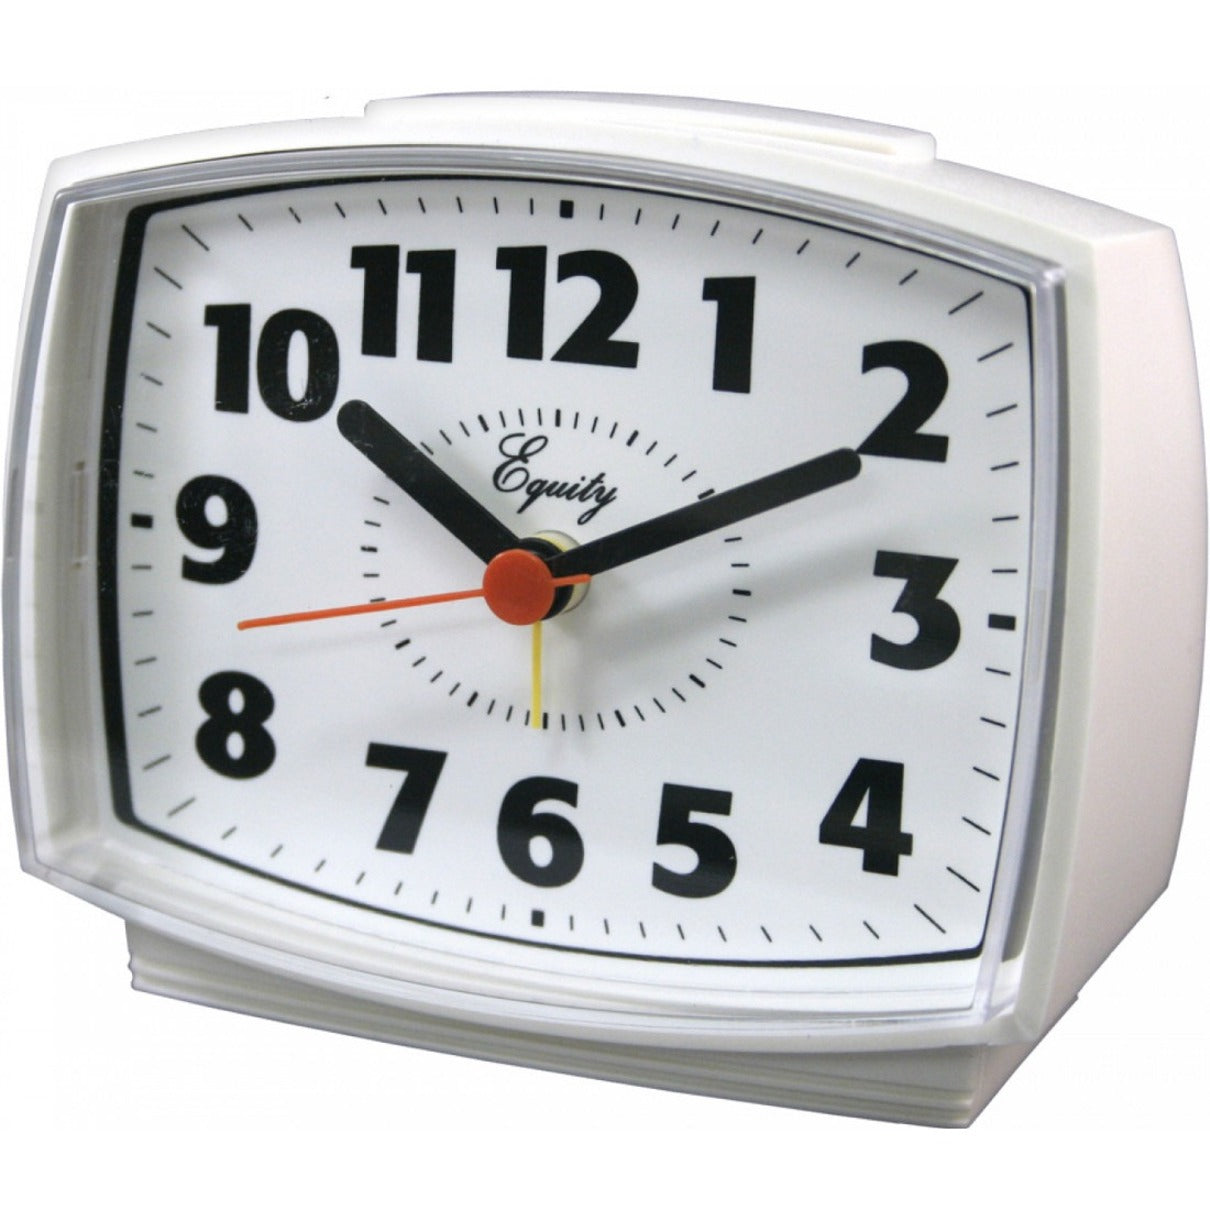 La Crosse Technology 33100 Electric Analog Alarm Clock, White Rectangle Table Clock with Alarm and Snooze